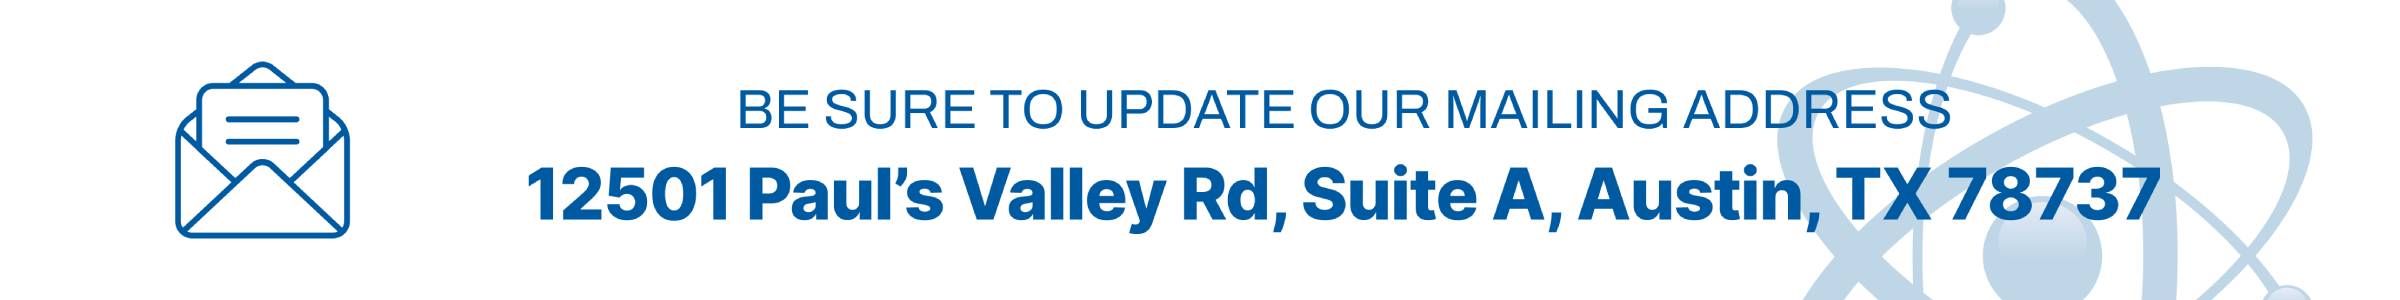 Be sure to update our mailing address: 12501 Pauls Valley Road, Suite A, Austin, Texas 78737